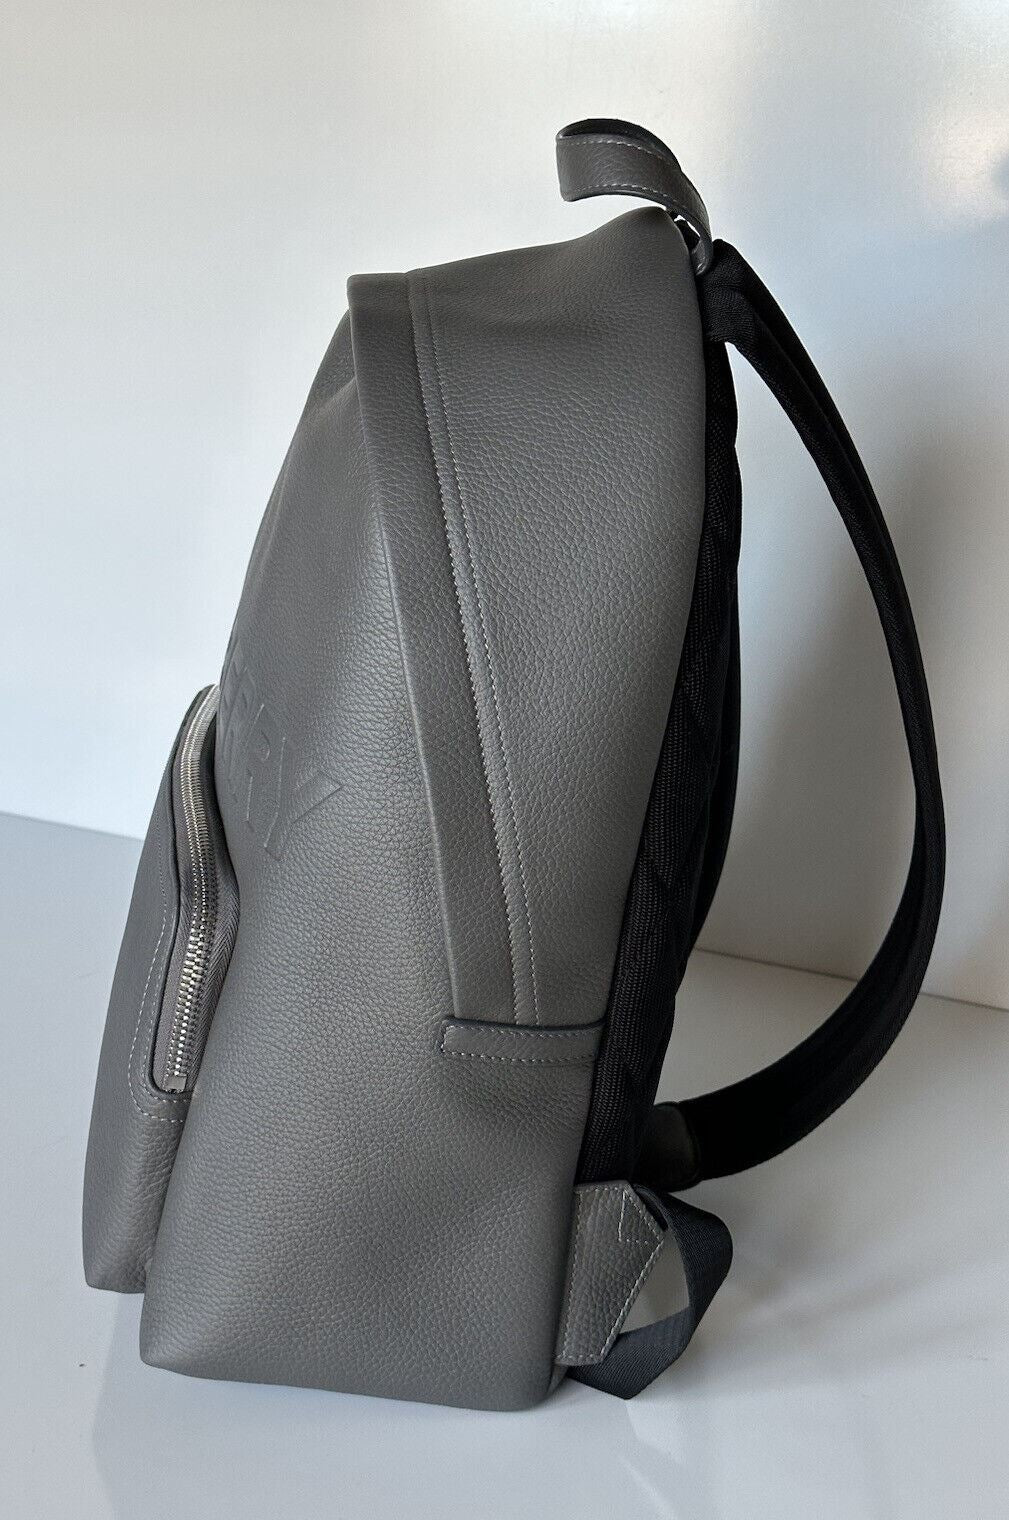 NWT $1650 Burberry Abbeydale Leather Logo Backpack Charcoal Grey 80528731